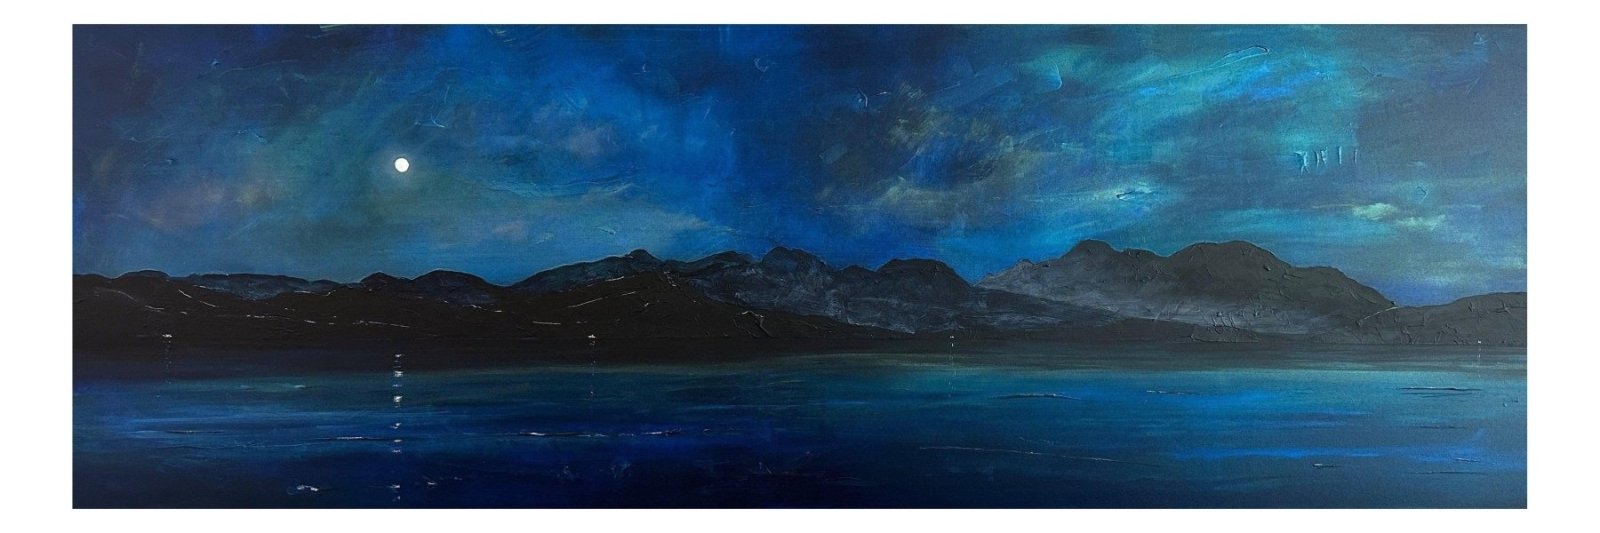 Arran Prussian Twilight-Panoramic Prints-Arran Art Gallery-Paintings, Prints, Homeware, Art Gifts From Scotland By Scottish Artist Kevin Hunter